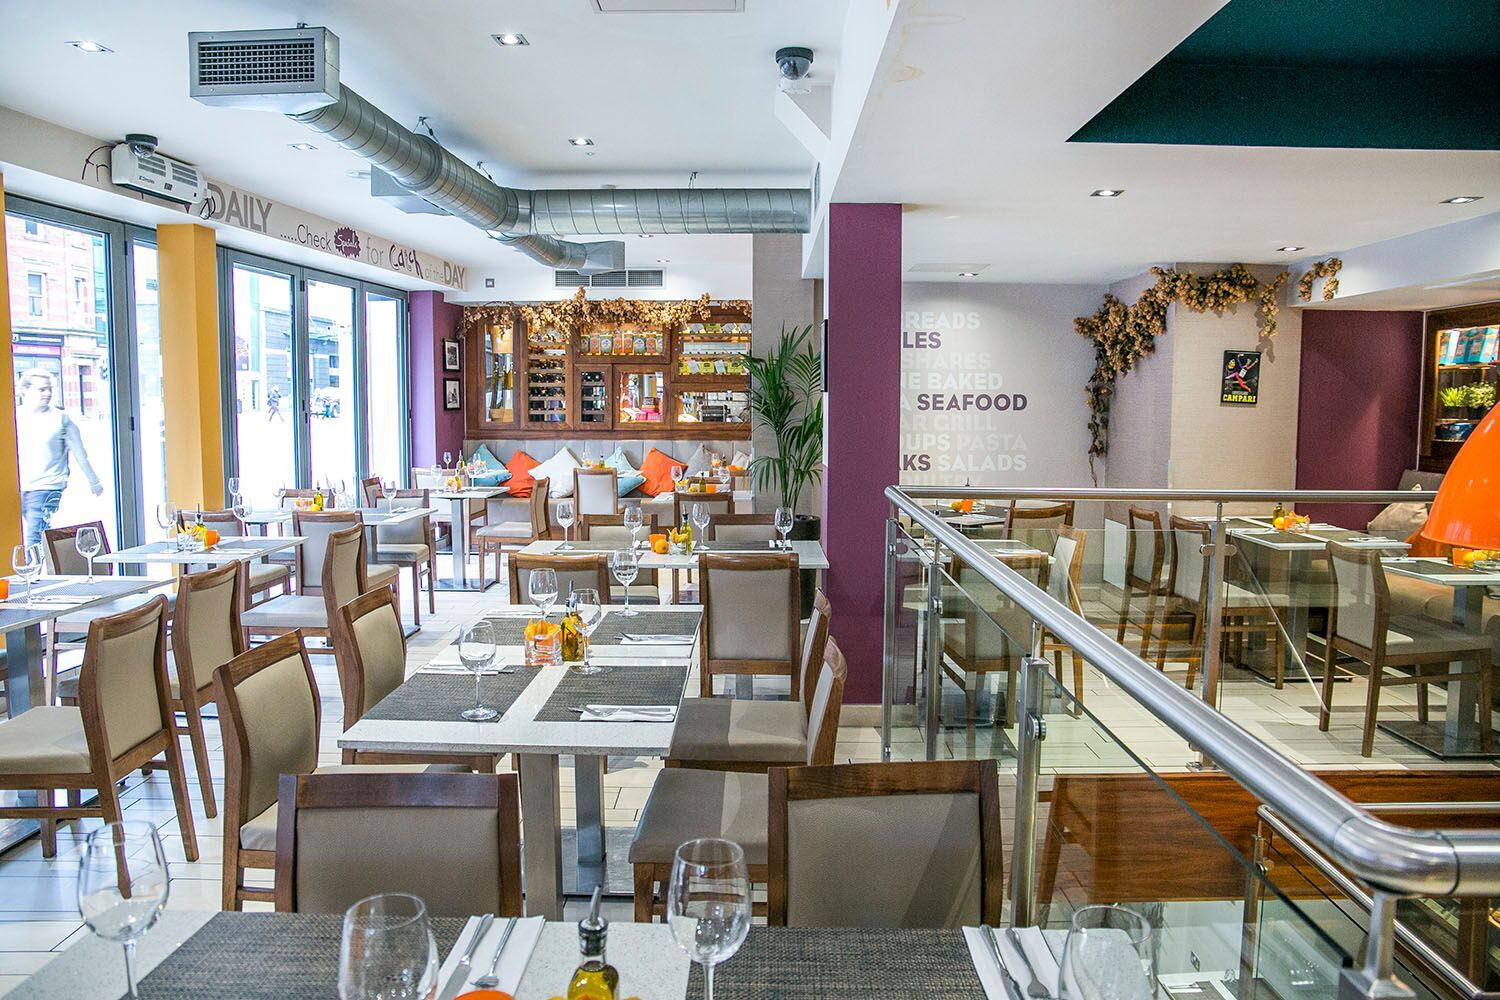 Cibo, Manchester - Restaurant Bookings & Offers - 5pm.co.uk